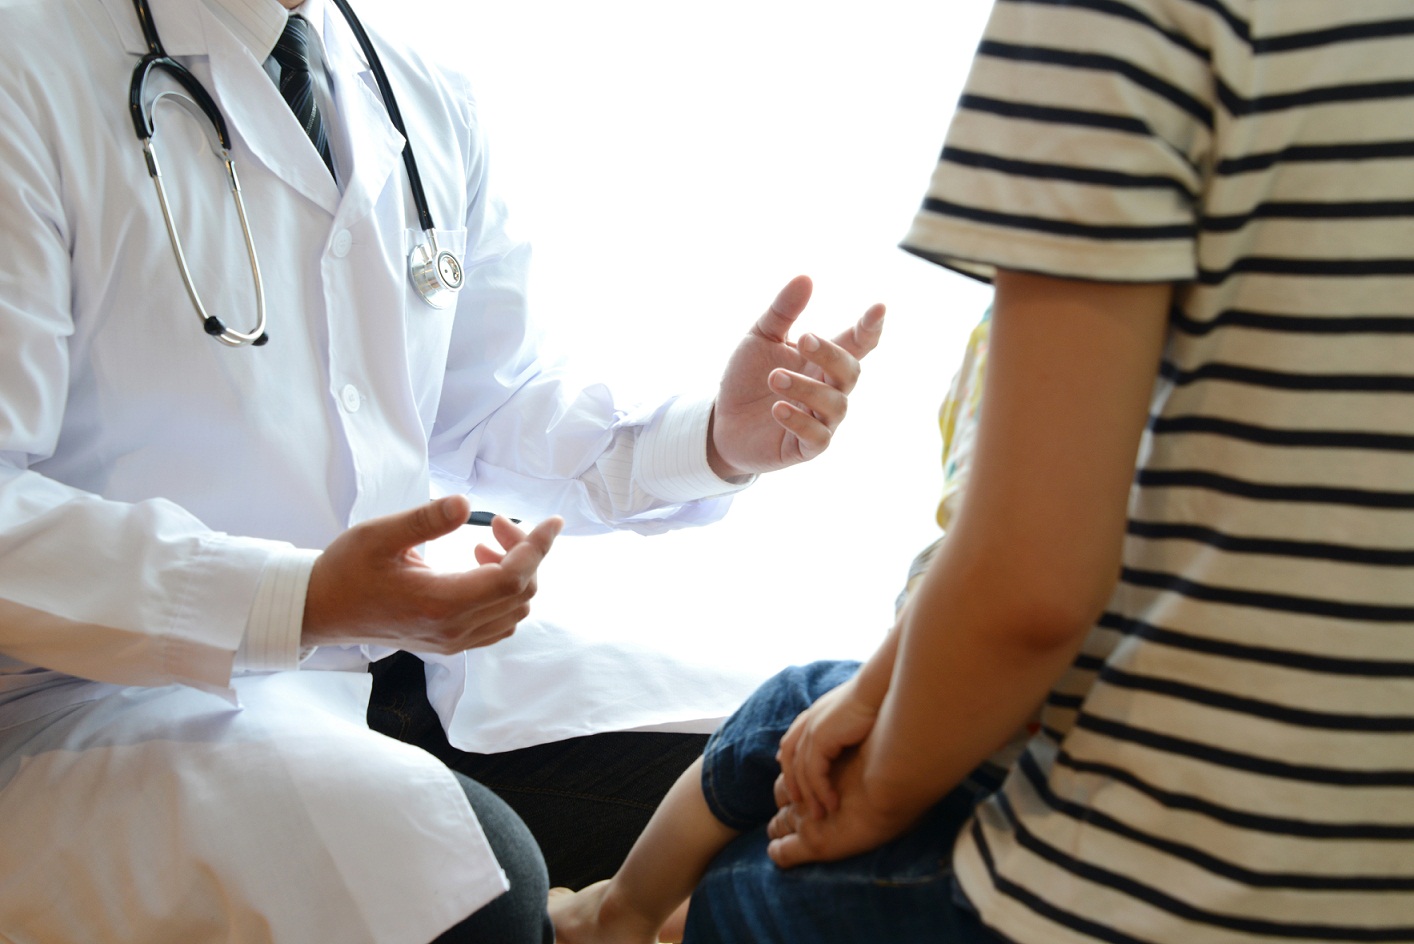 doctor talking to parent and child